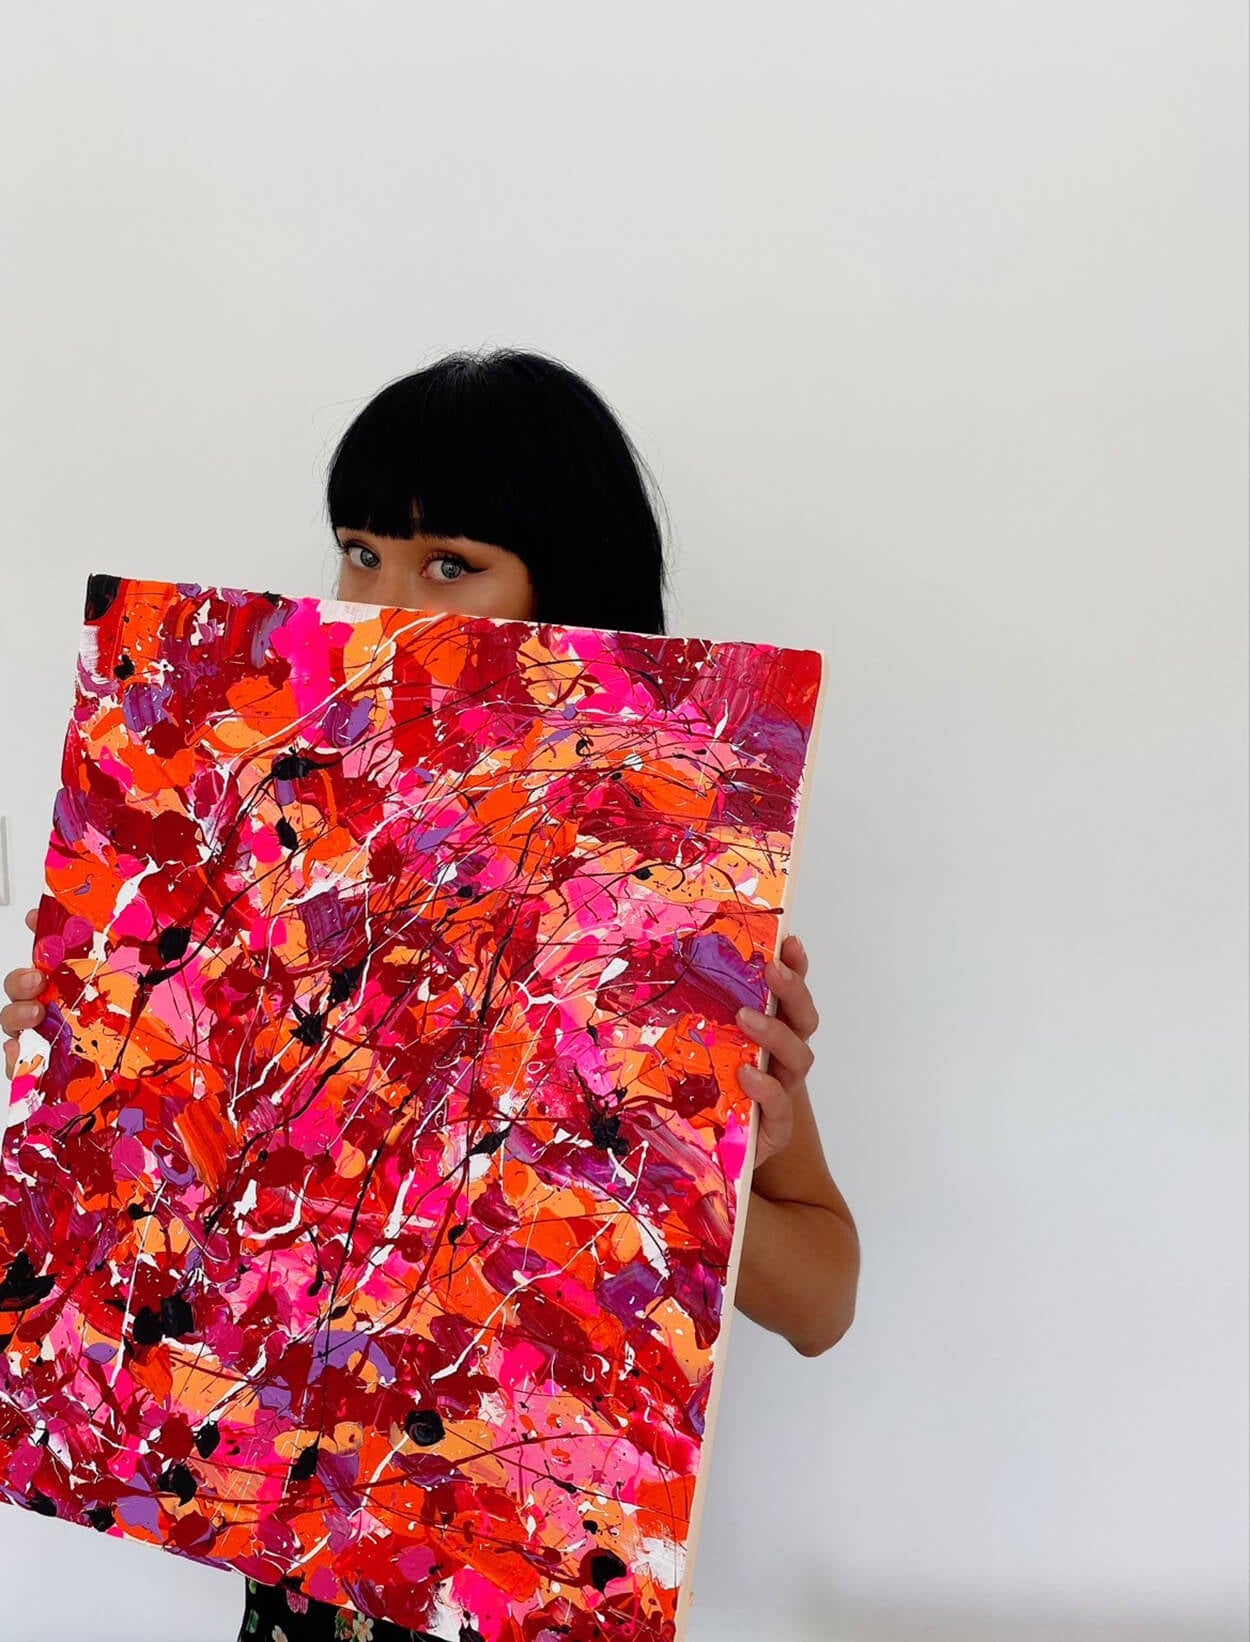 Artist Bridget Bradley holding a red abstract artwork in front of her